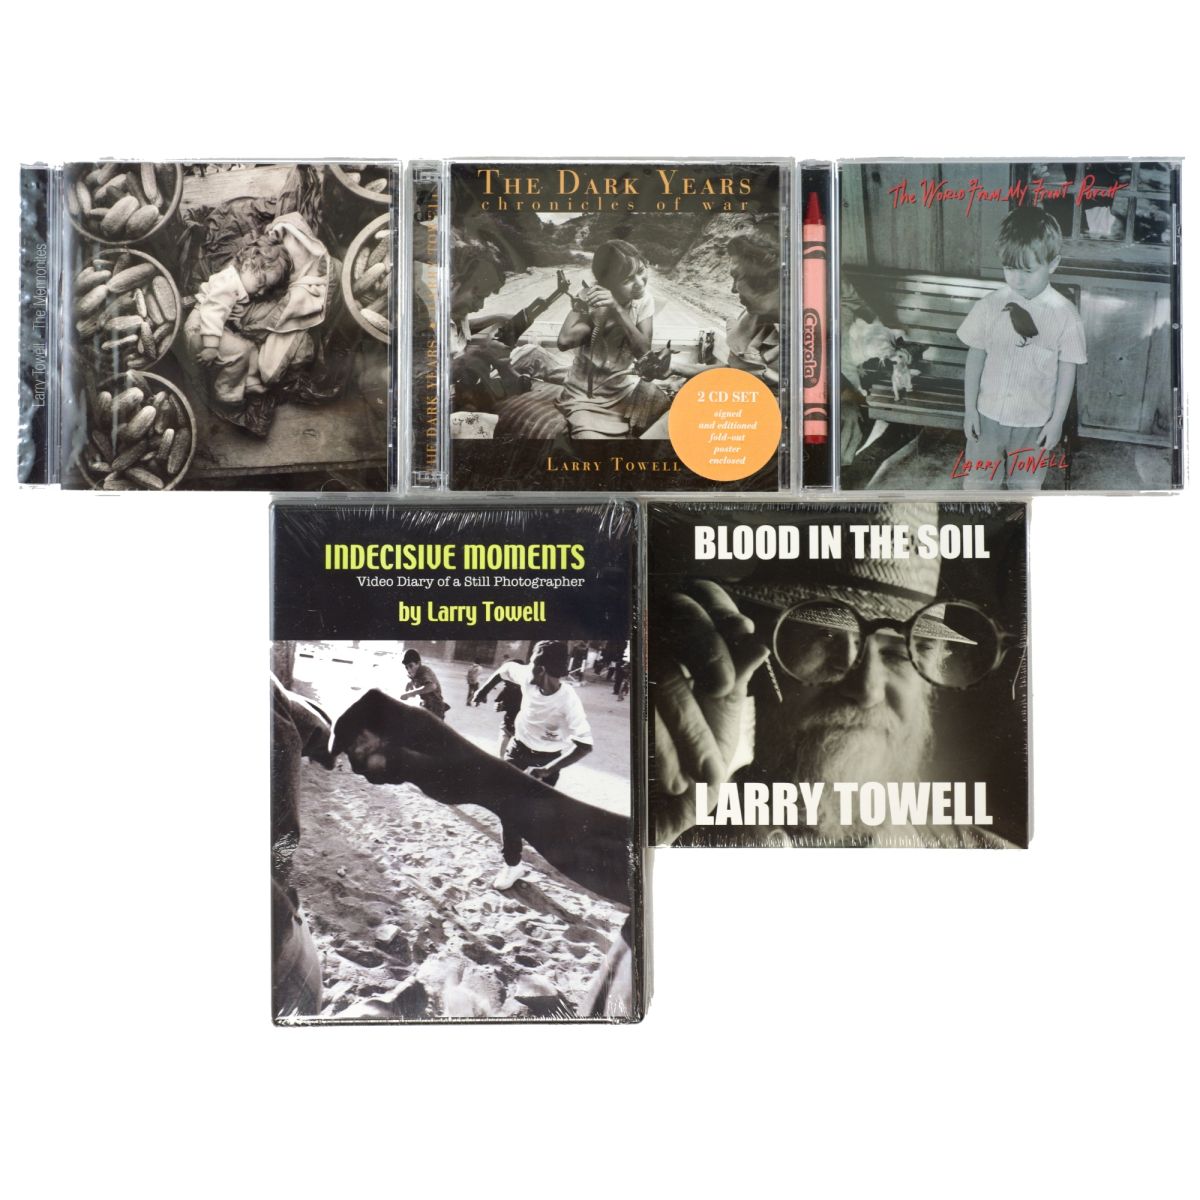 The music and video diary of Larry Towell